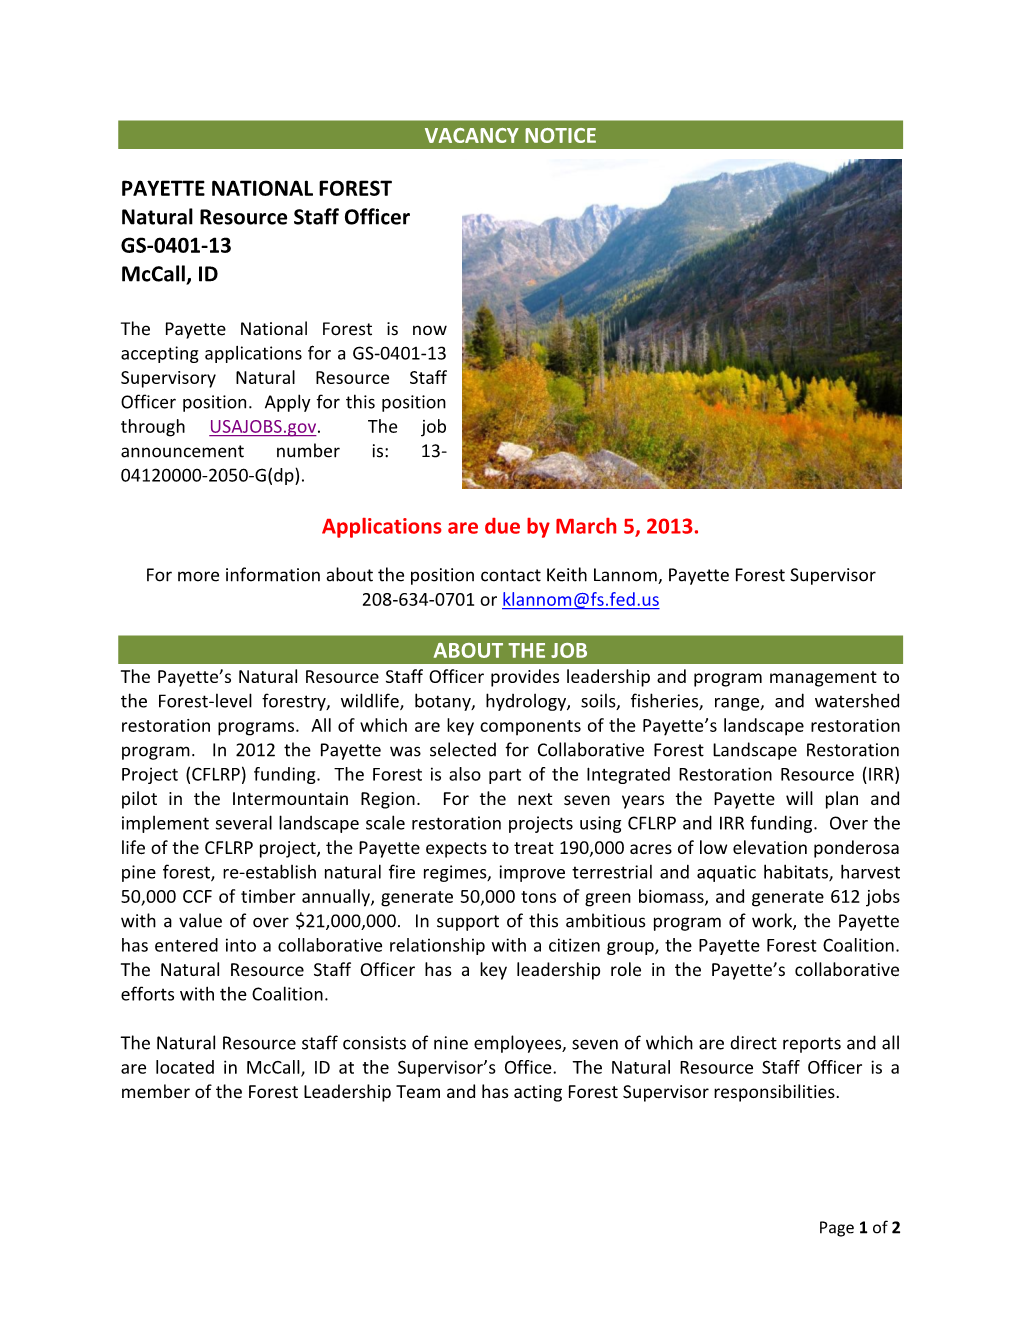 VACANCY NOTICE PAYETTE NATIONAL FOREST Natural Resource Staff Officer GS-0401-13 Mccall, ID Applications Are Due by March 5